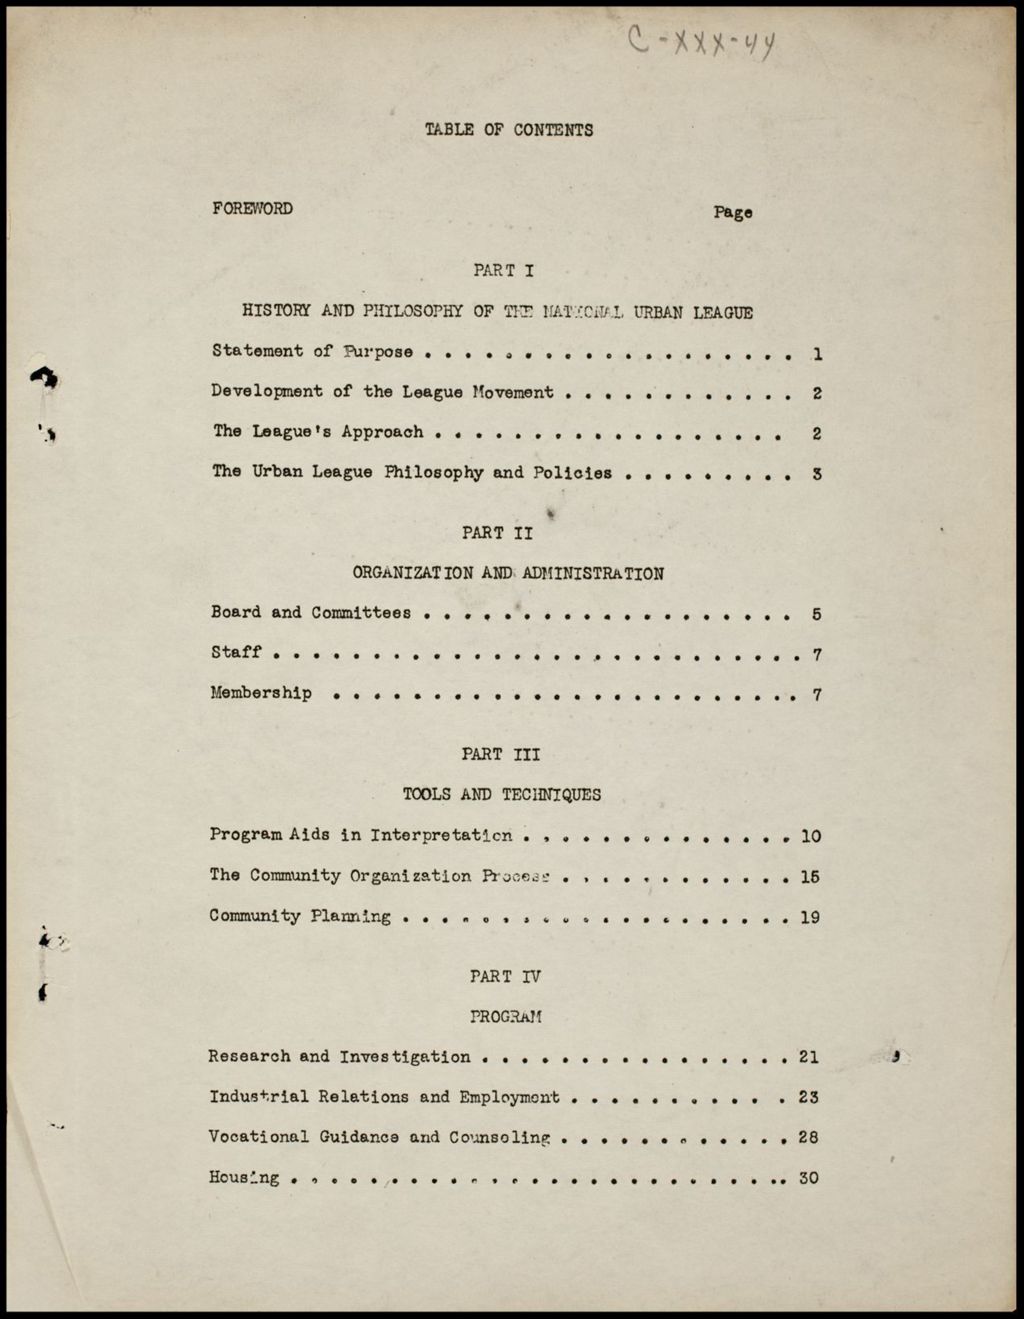 Miniature of Handbook of Operations for Urban League Personnel, undated (Folder I-2680)